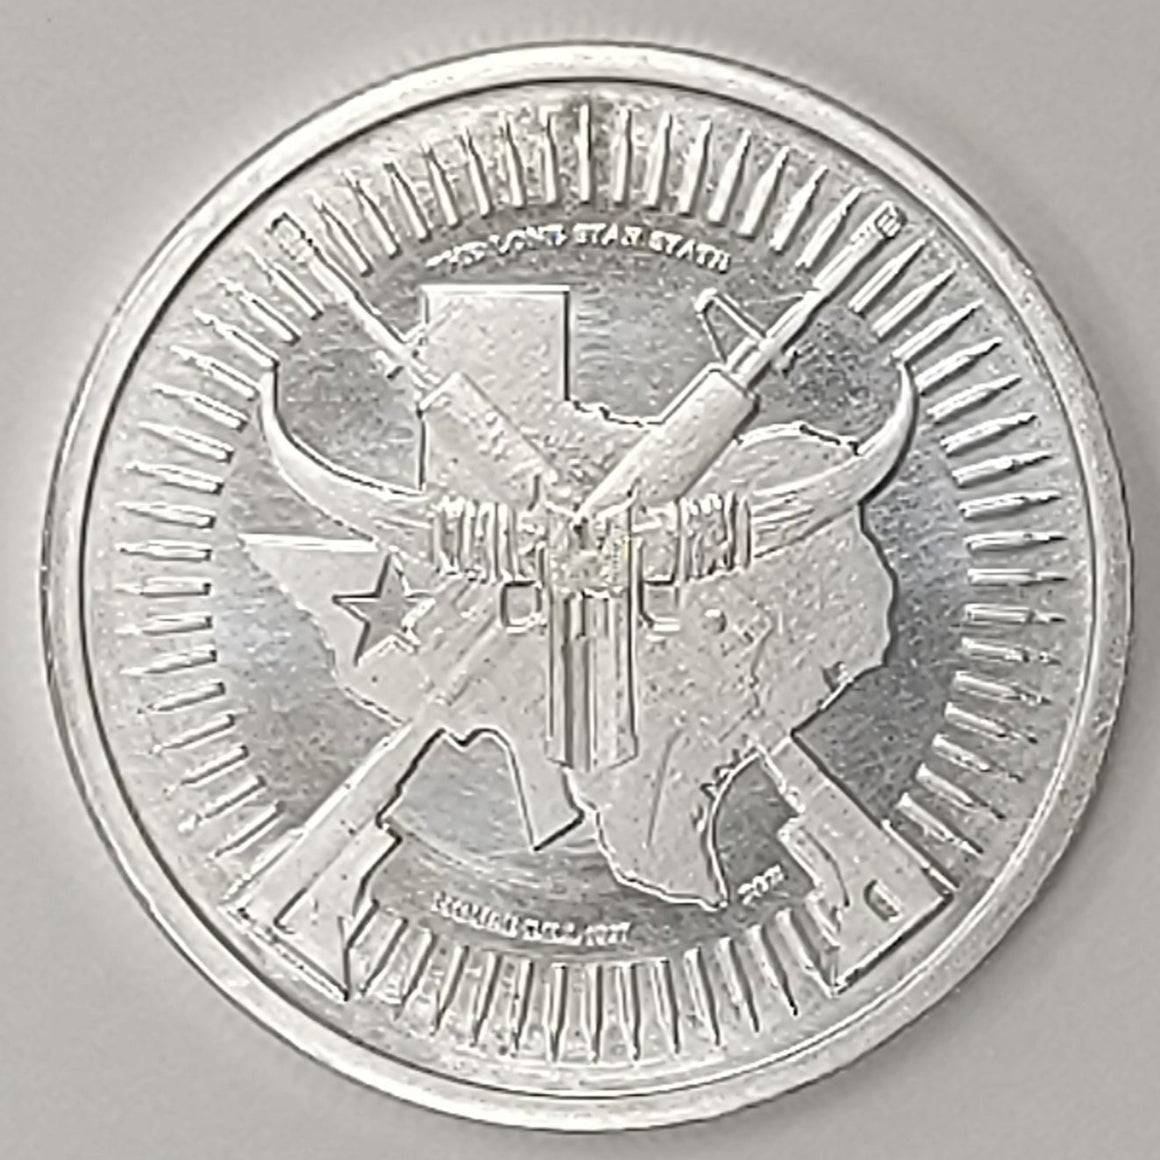 Constitutional Carry 1oz .999 Silver Round